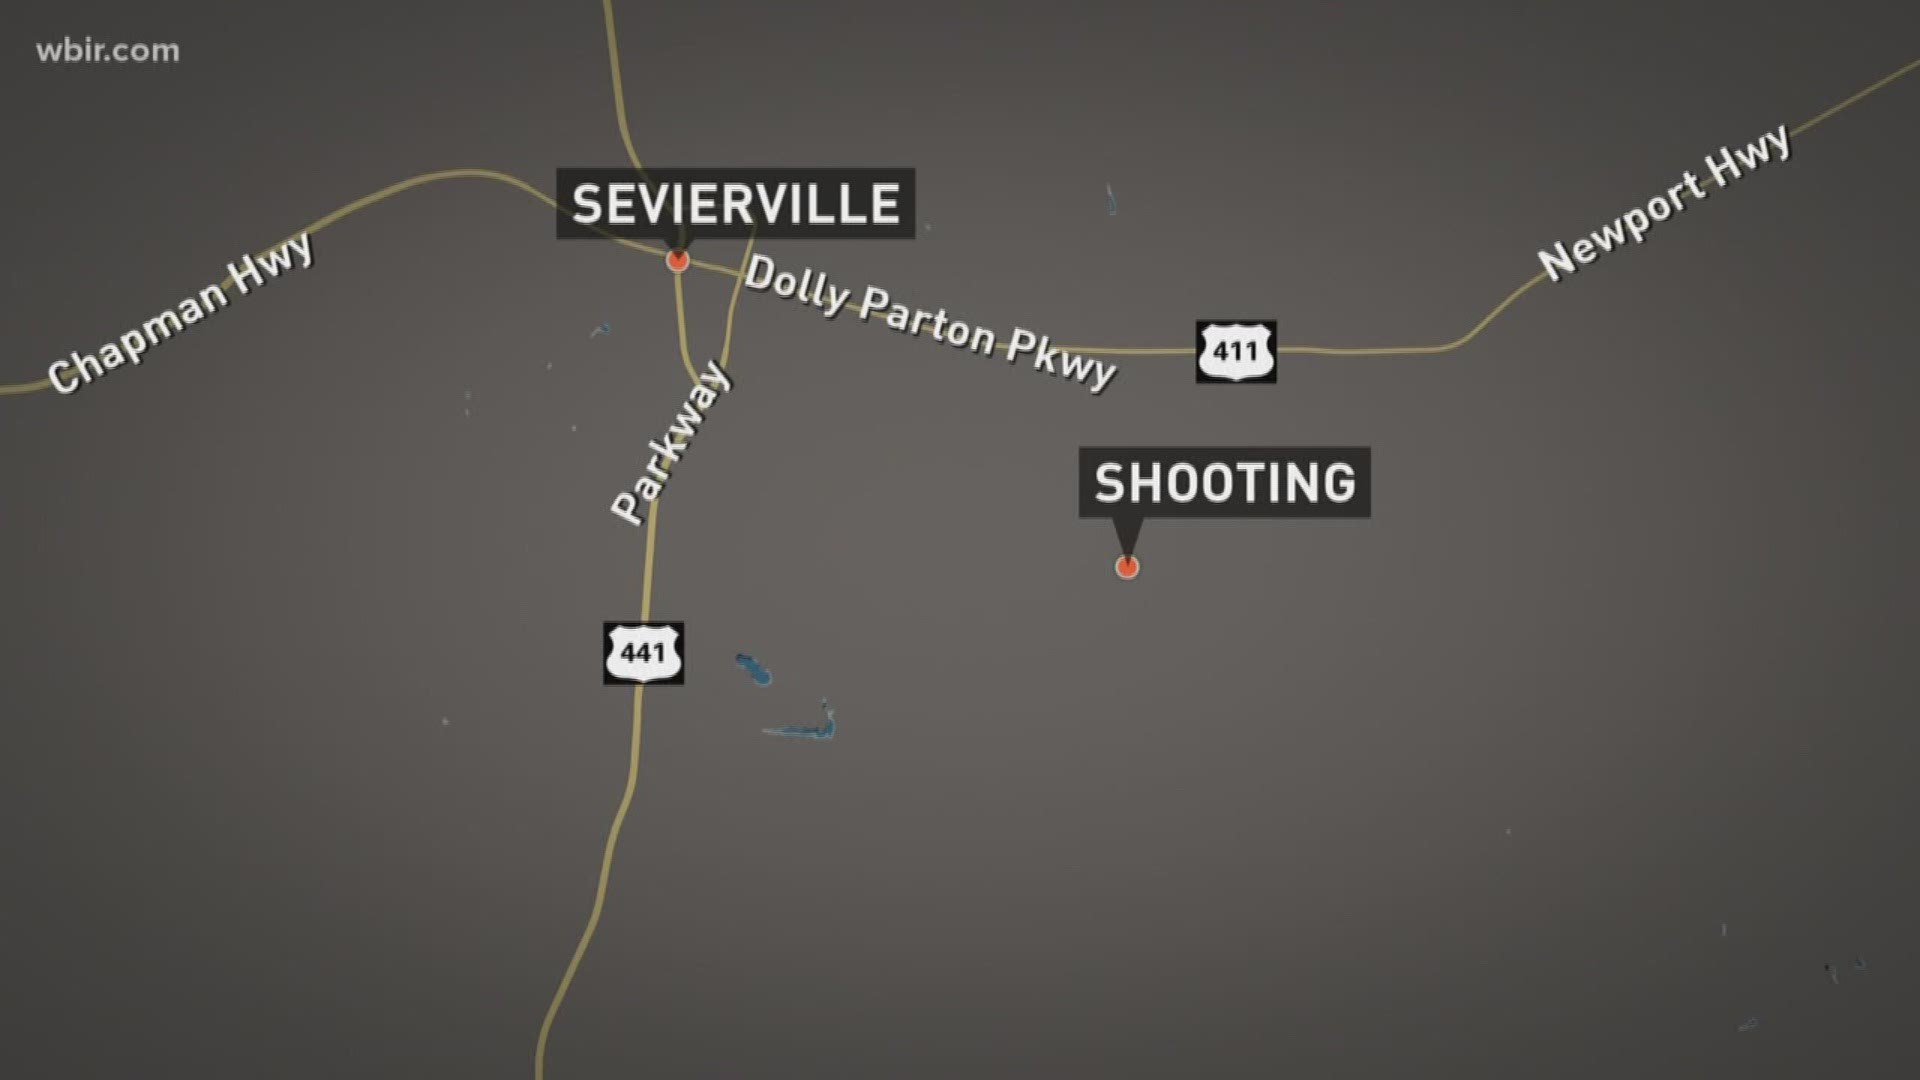 Sevierville police say one man was hurt from a gunshot after an argument escalated Wednesday night.